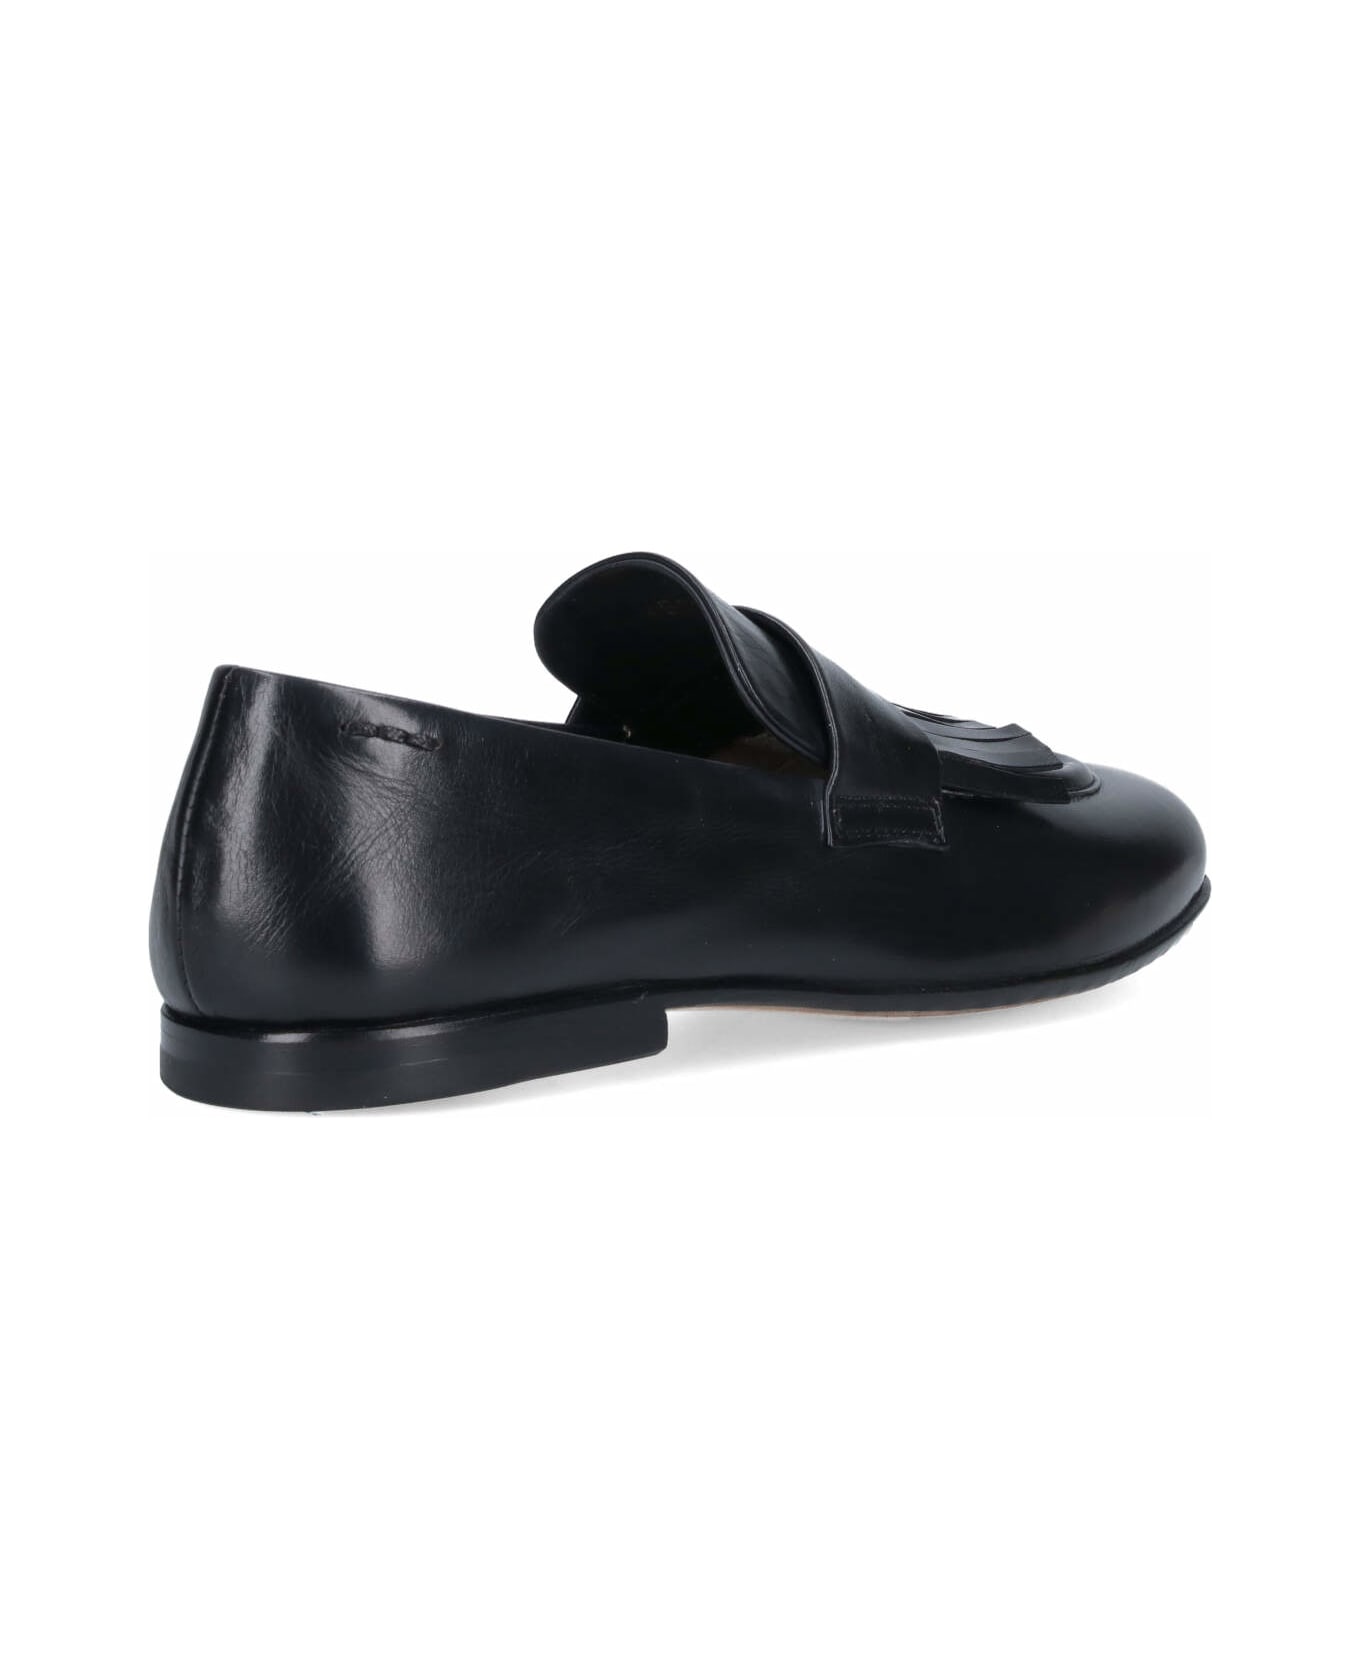 Alexander Hotto Fringed Detail Loafers - Black  